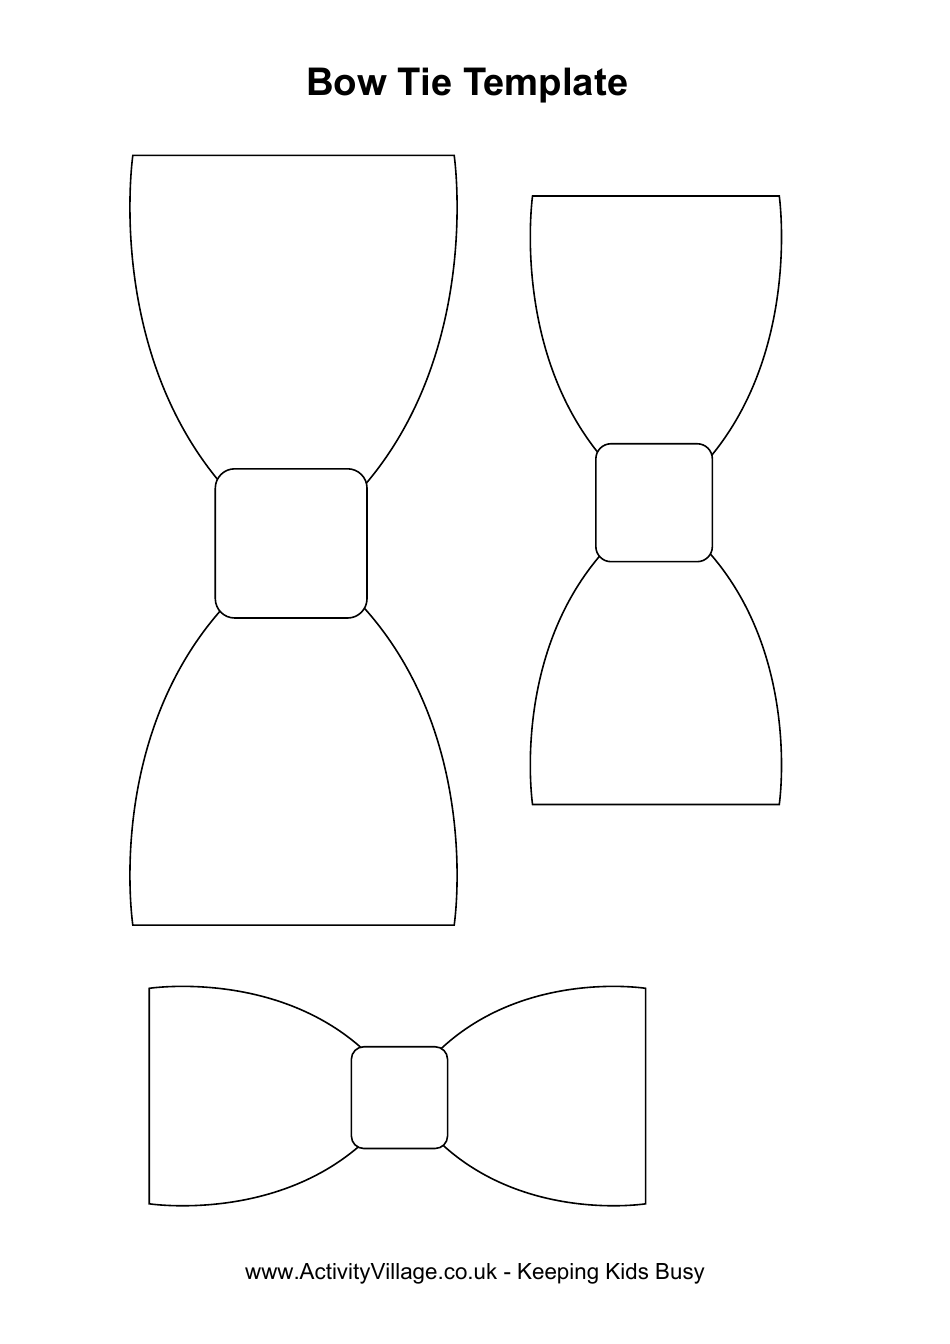 Bow Tie Template image preview - Download and use this versatile and stylish Bow Tie Template for various craft projects and DIYs. This downloadable template features precise measurements and a clean design, making it easy to create your own bow ties for weddings, formal events, or any stylish ensemble.